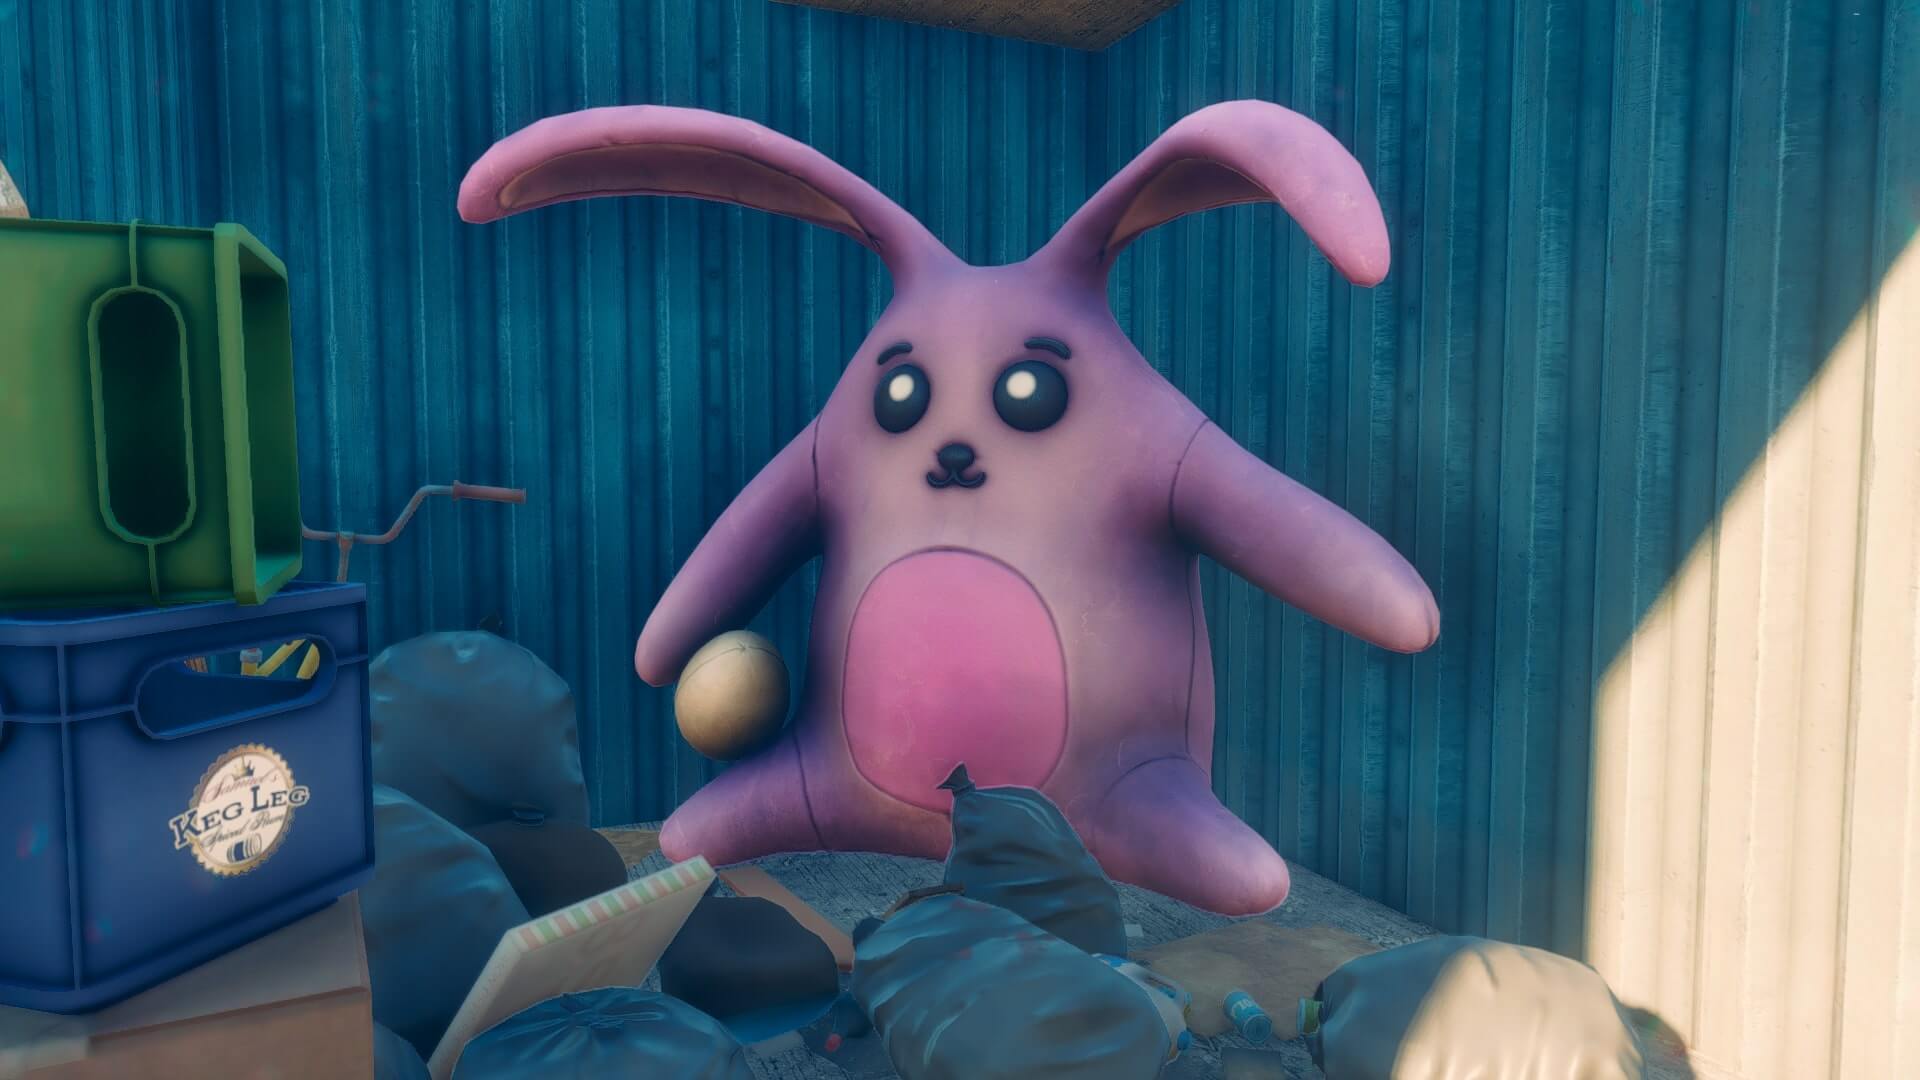 The pink Cabbit makes a return in Saints Row 2022 as an easter egg